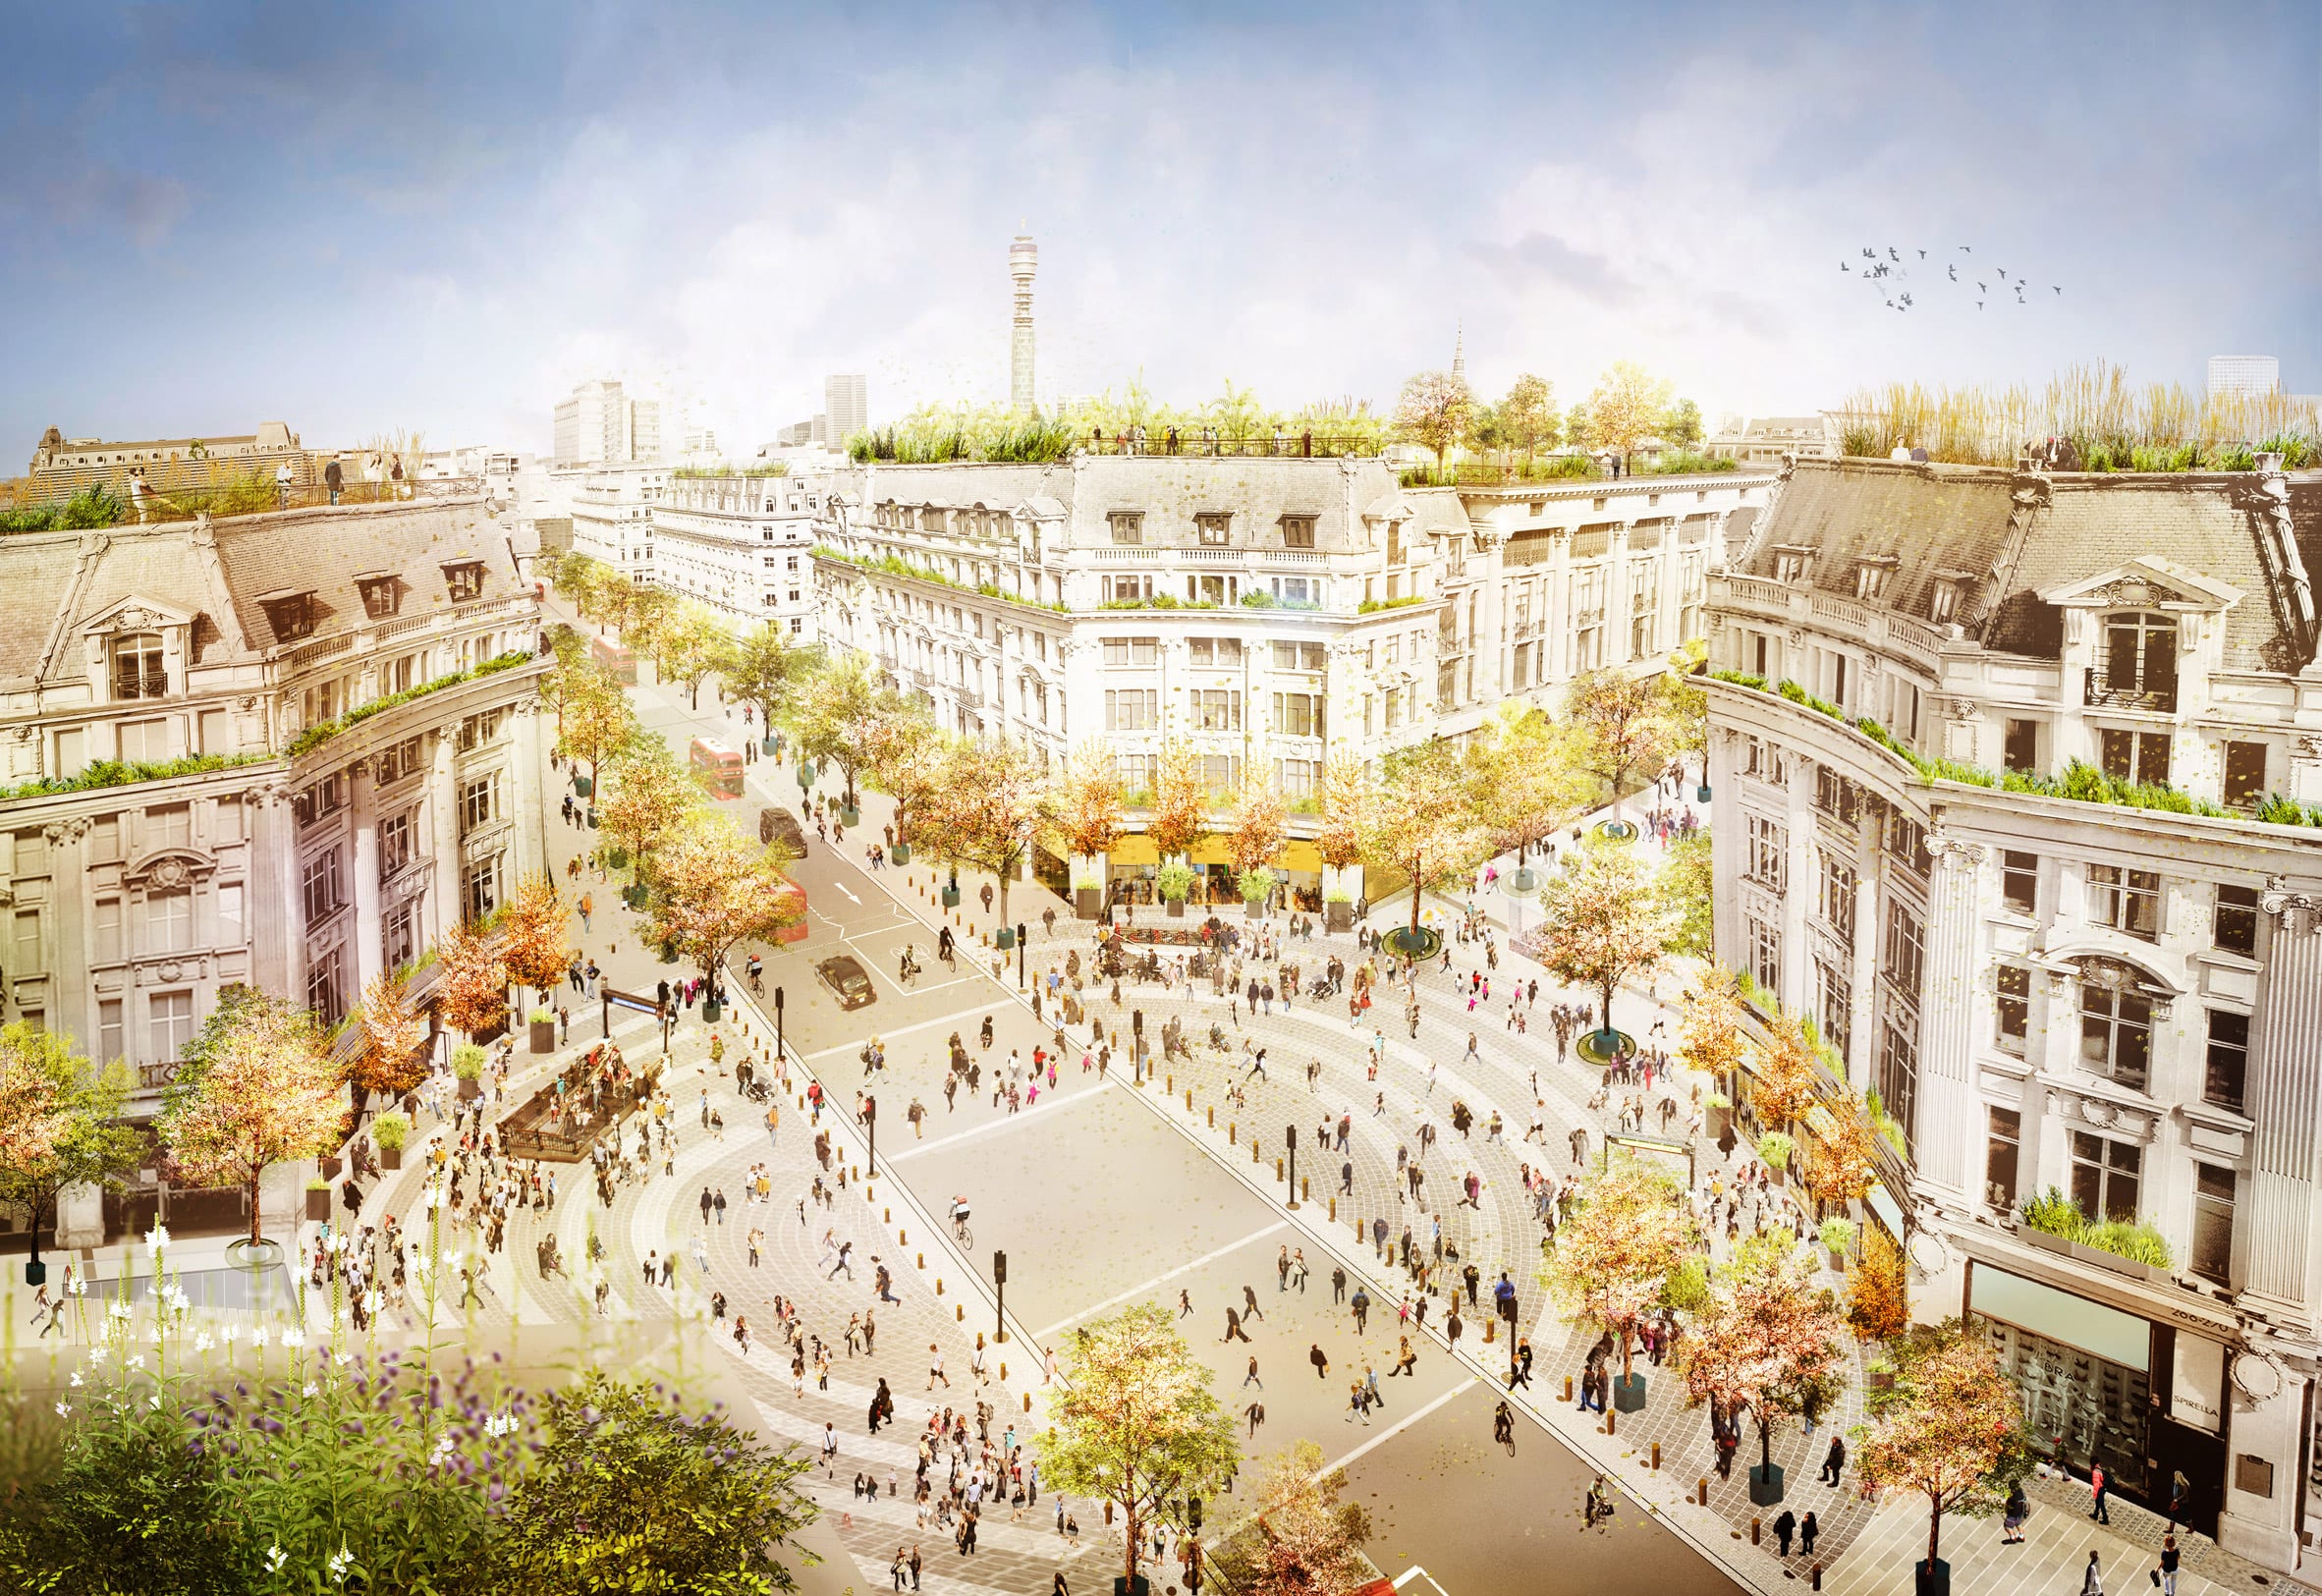 Pedestrianisation of Oxford Circus will create rival to Times Square